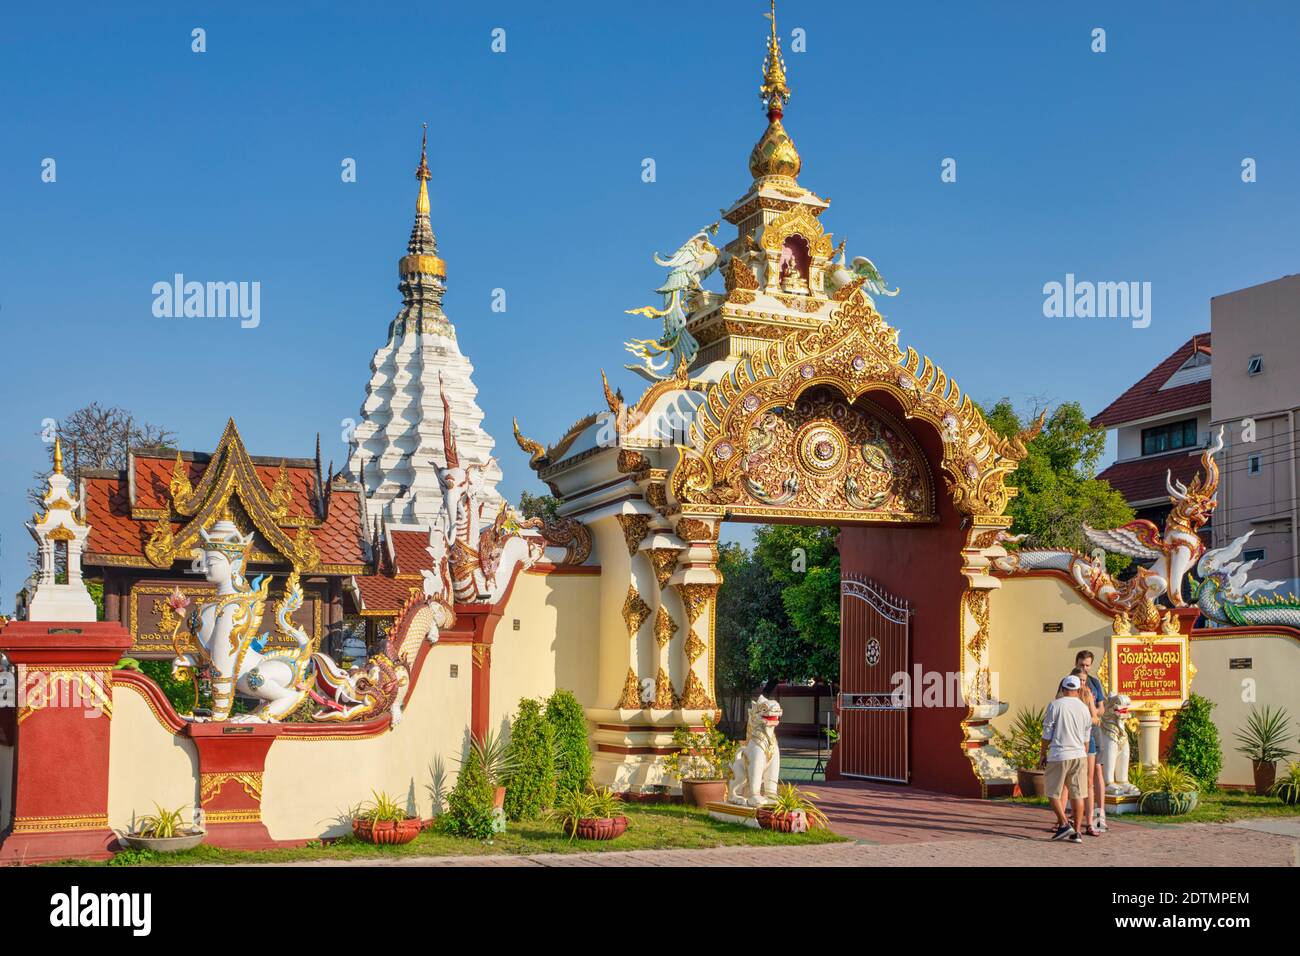 Thailand, Chiang Mai City, Little Temple next to Wat Chedi Luang Stock Photo